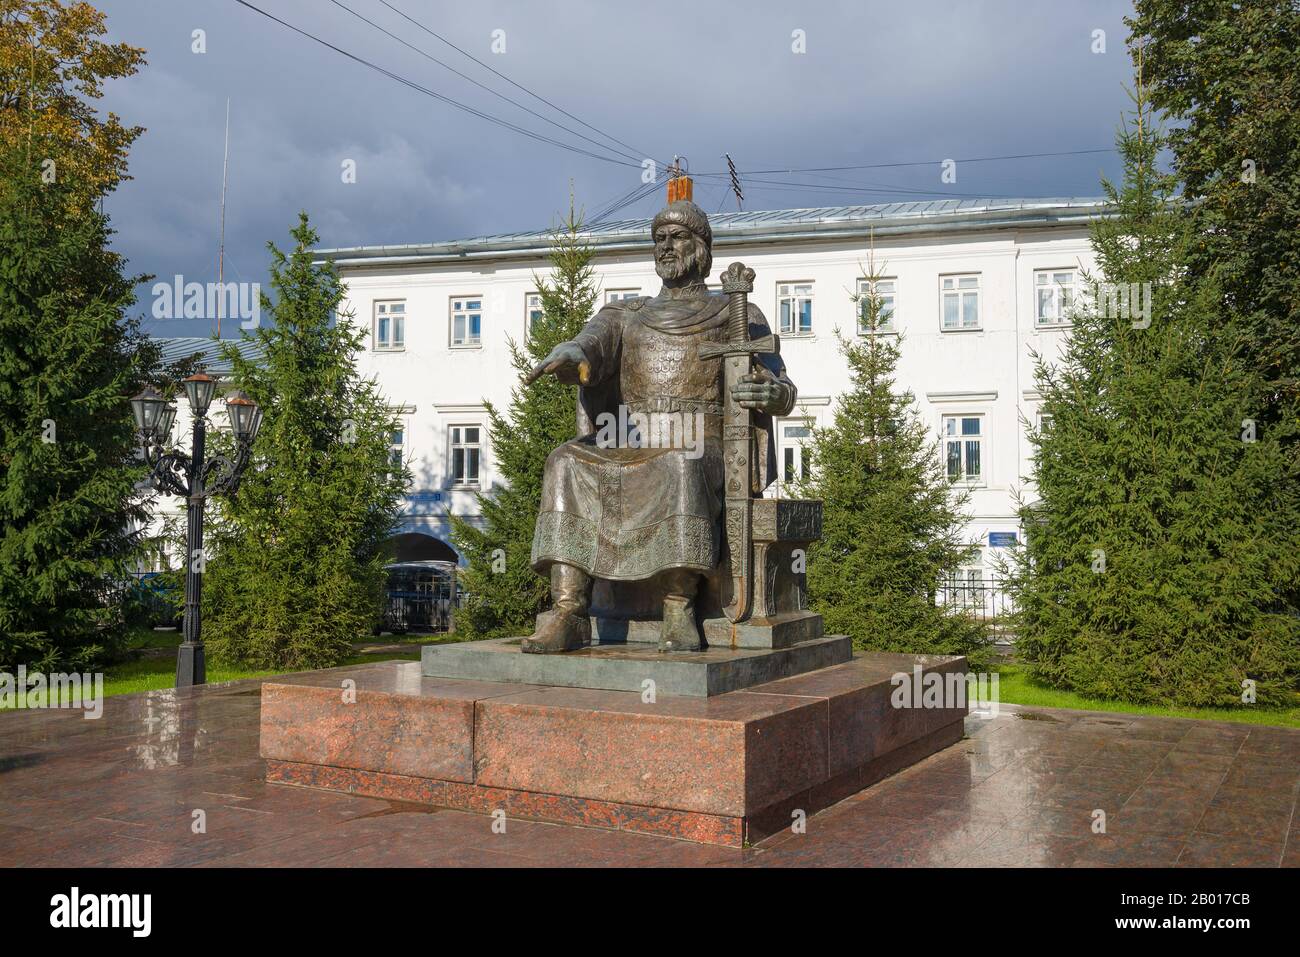 KOSTROMA, RUSSIA - SEPTEMBER 16, 2016: Monument to the founder of Kostroma - Prince Yuri Dolgoruky closeup September day. Golden ring of Russia Stock Photo